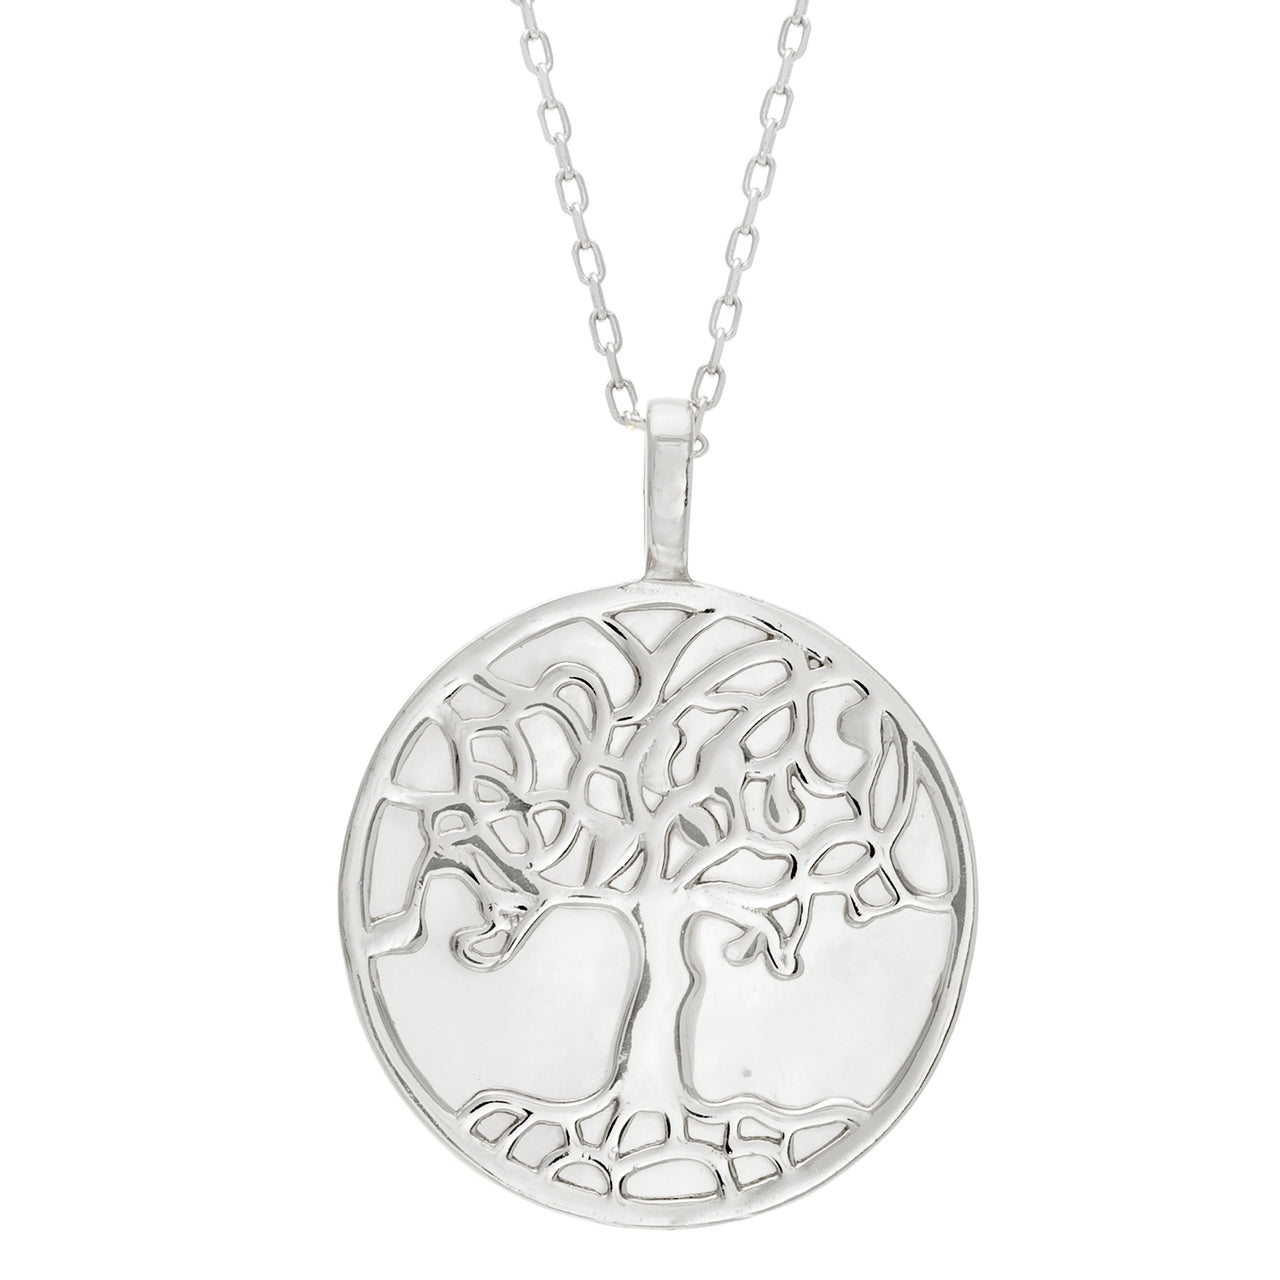 Lesa Michele Sterling Silver Tree of Life Necklace with Mother of Pearl